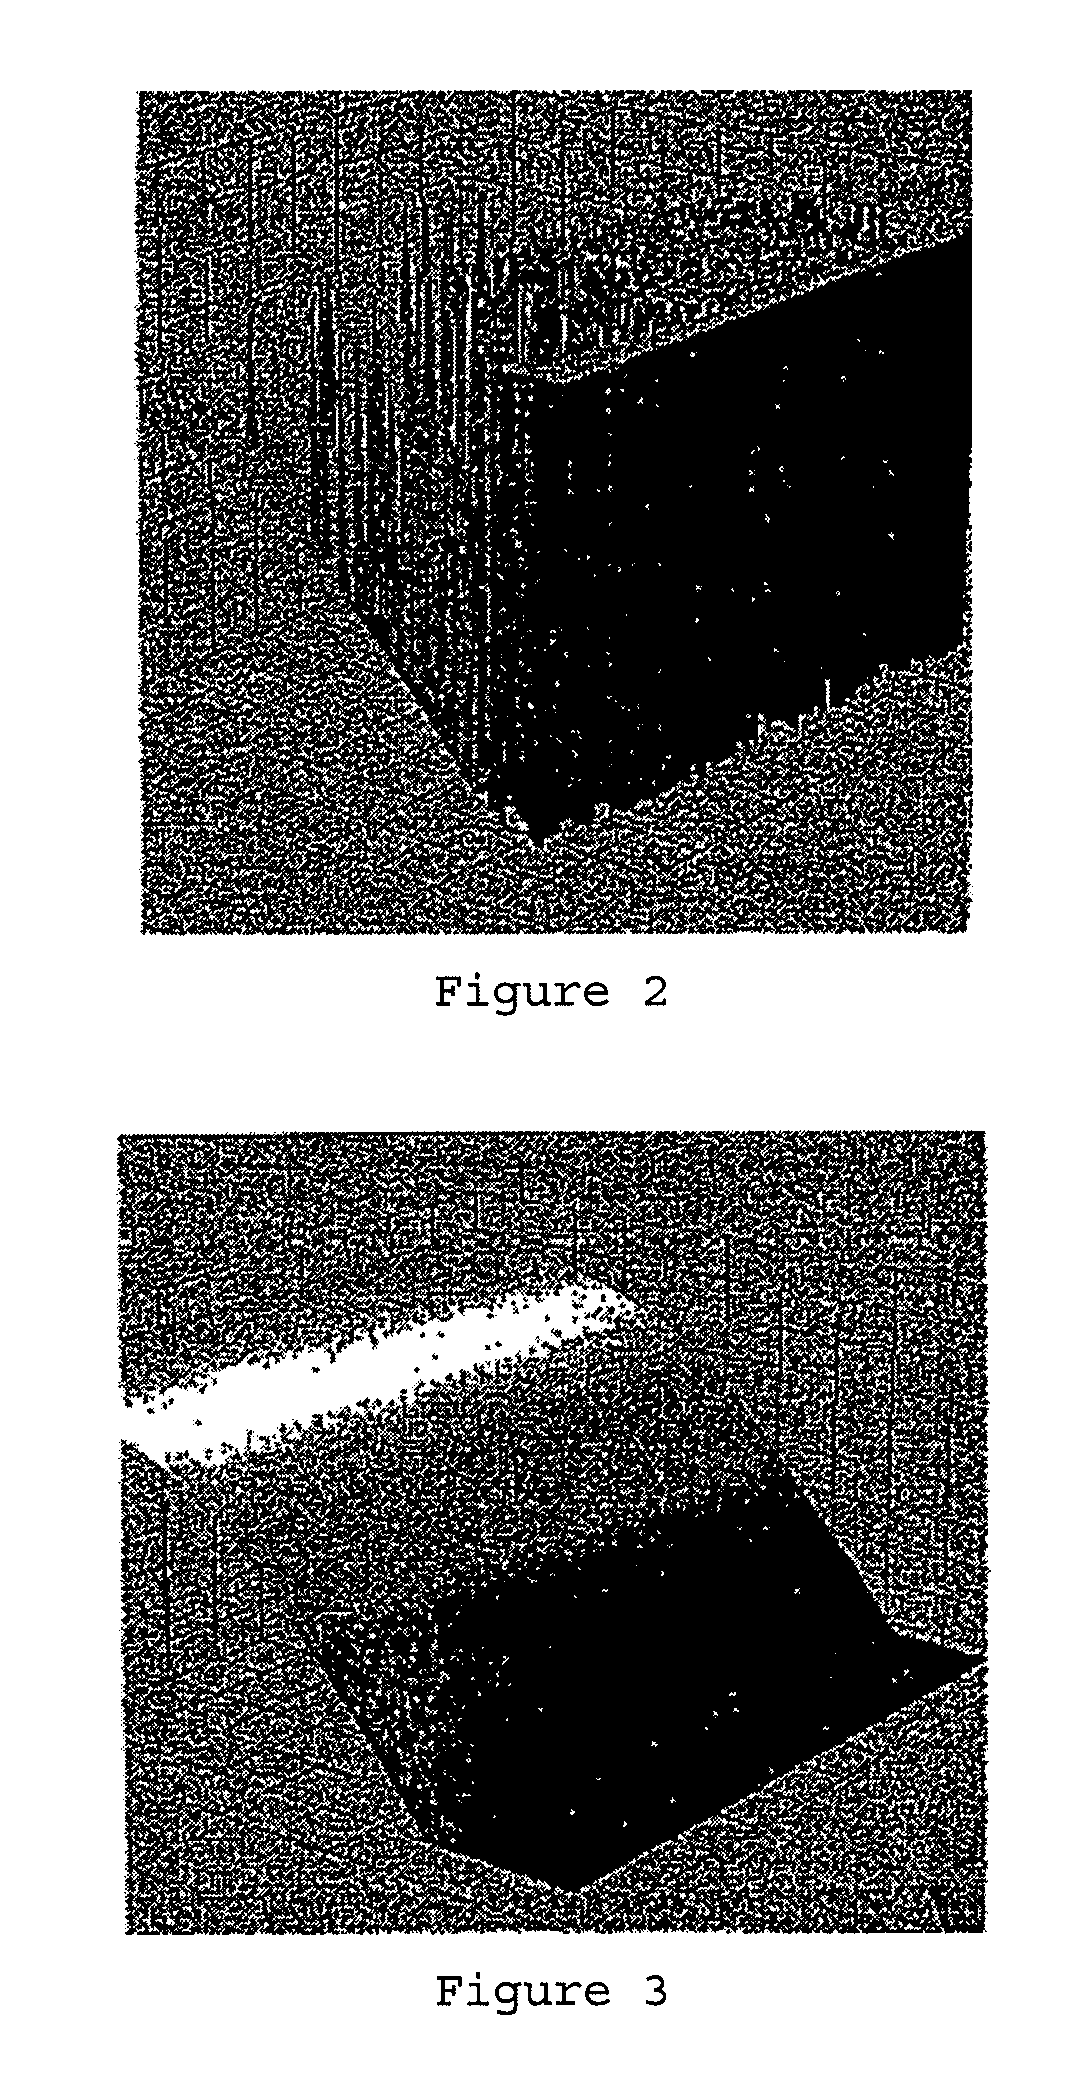 Method for processing values from a measurement